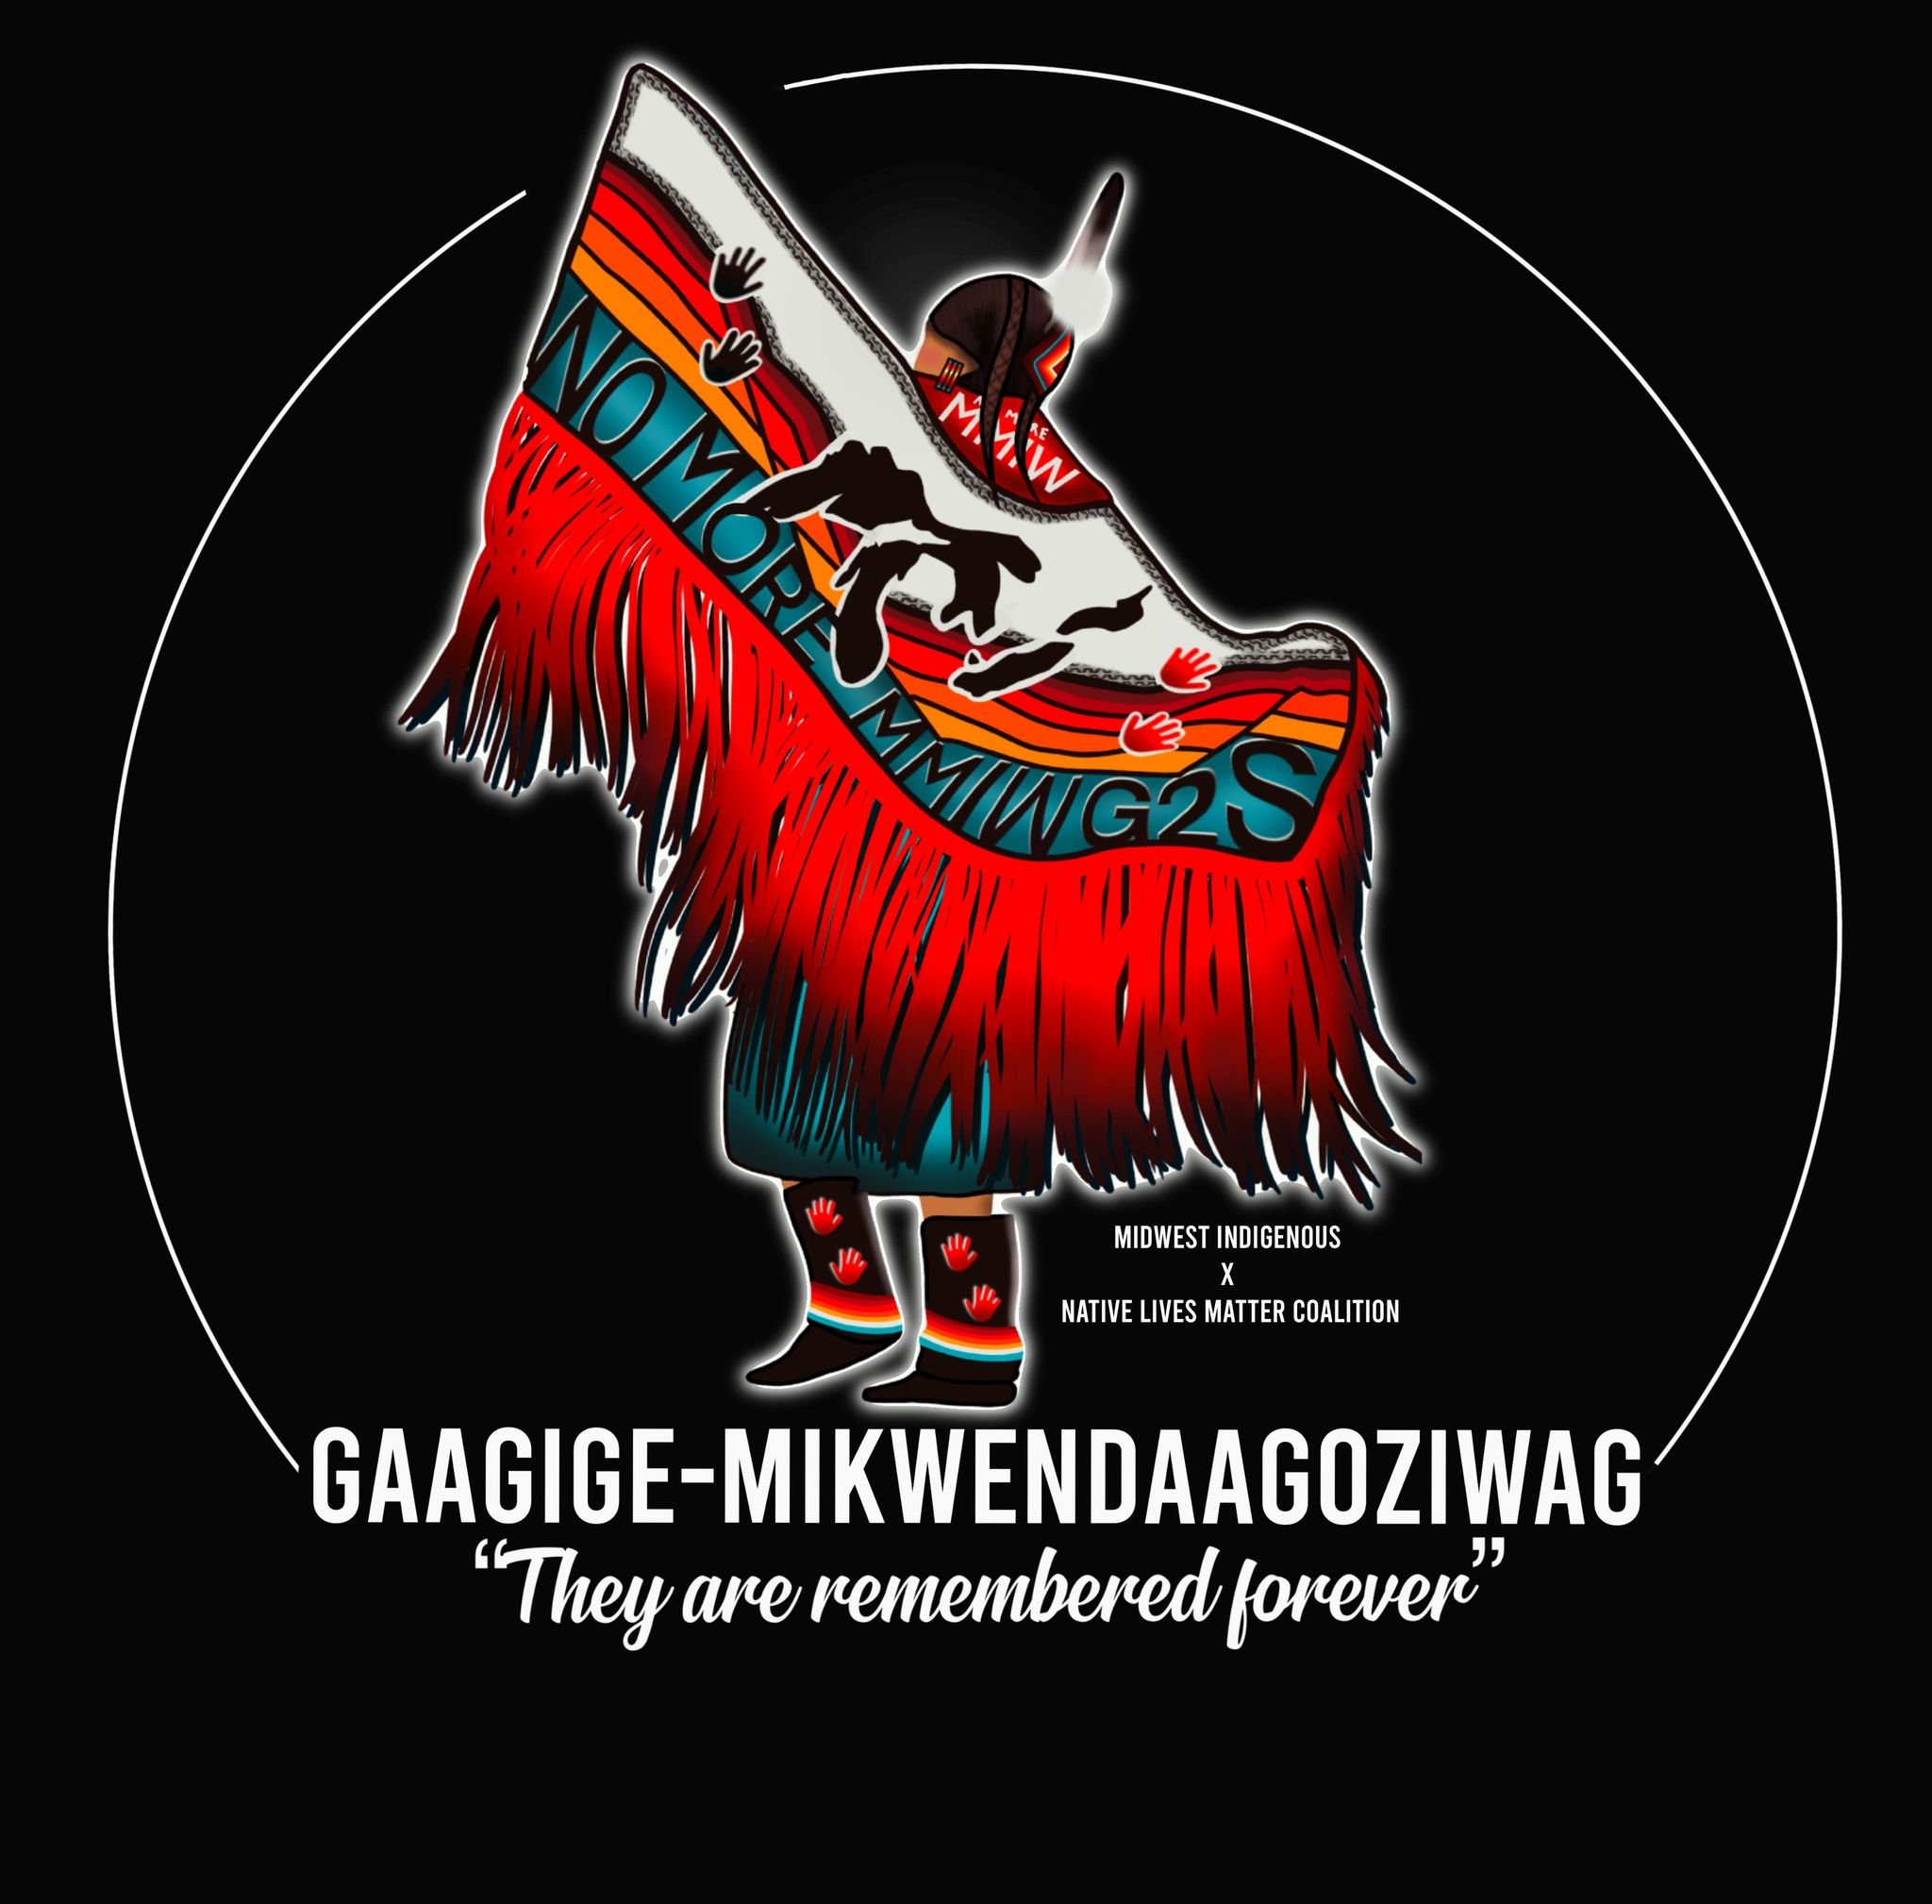 Sunday, May 5 is National Missing and Murdered Indigenous Relatives Day (MMIR). There will be an awareness gathering in Ashland at the Bandshell at Noon. Let us stand in solidarity and raise awareness.